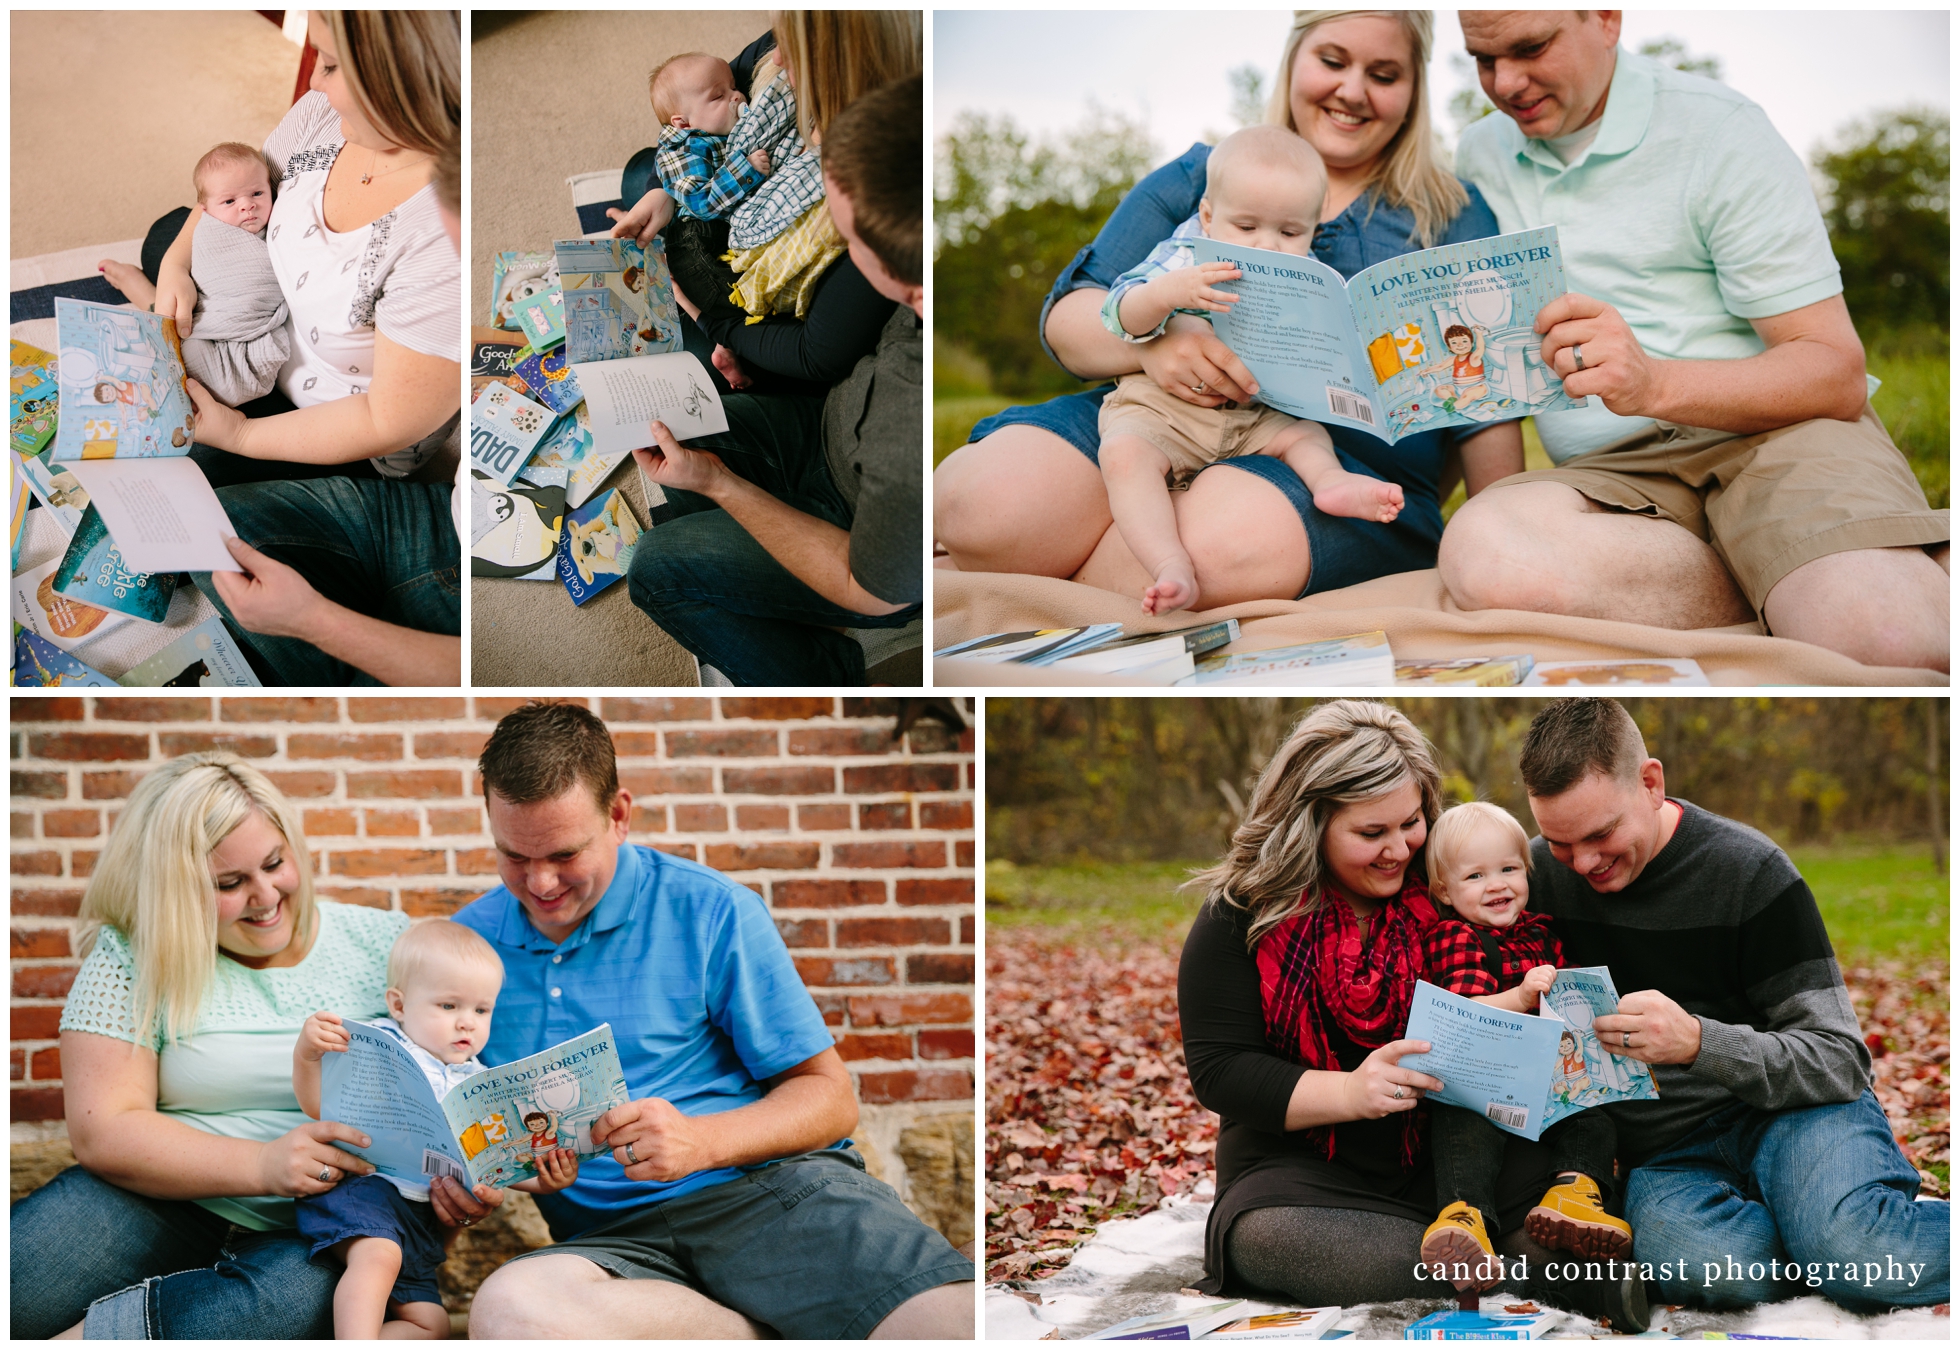 creative baby photo ideas for baby's first year, family reading the same book together